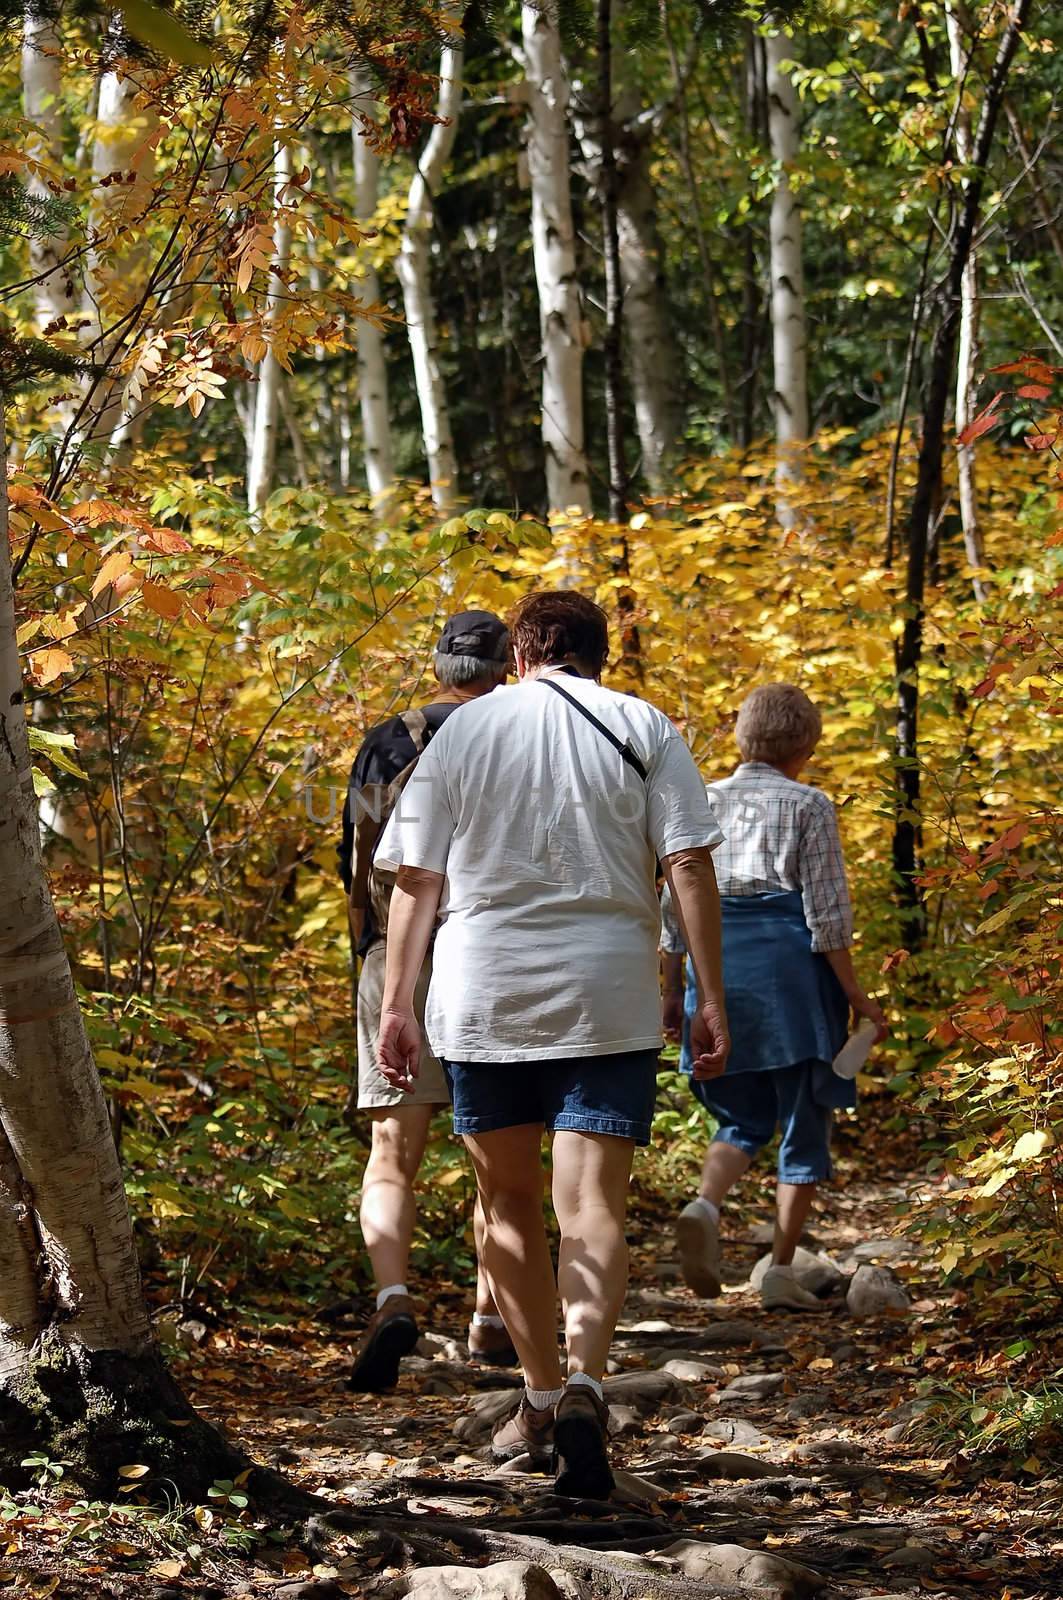 Sunday family hiking in a trail in autumn